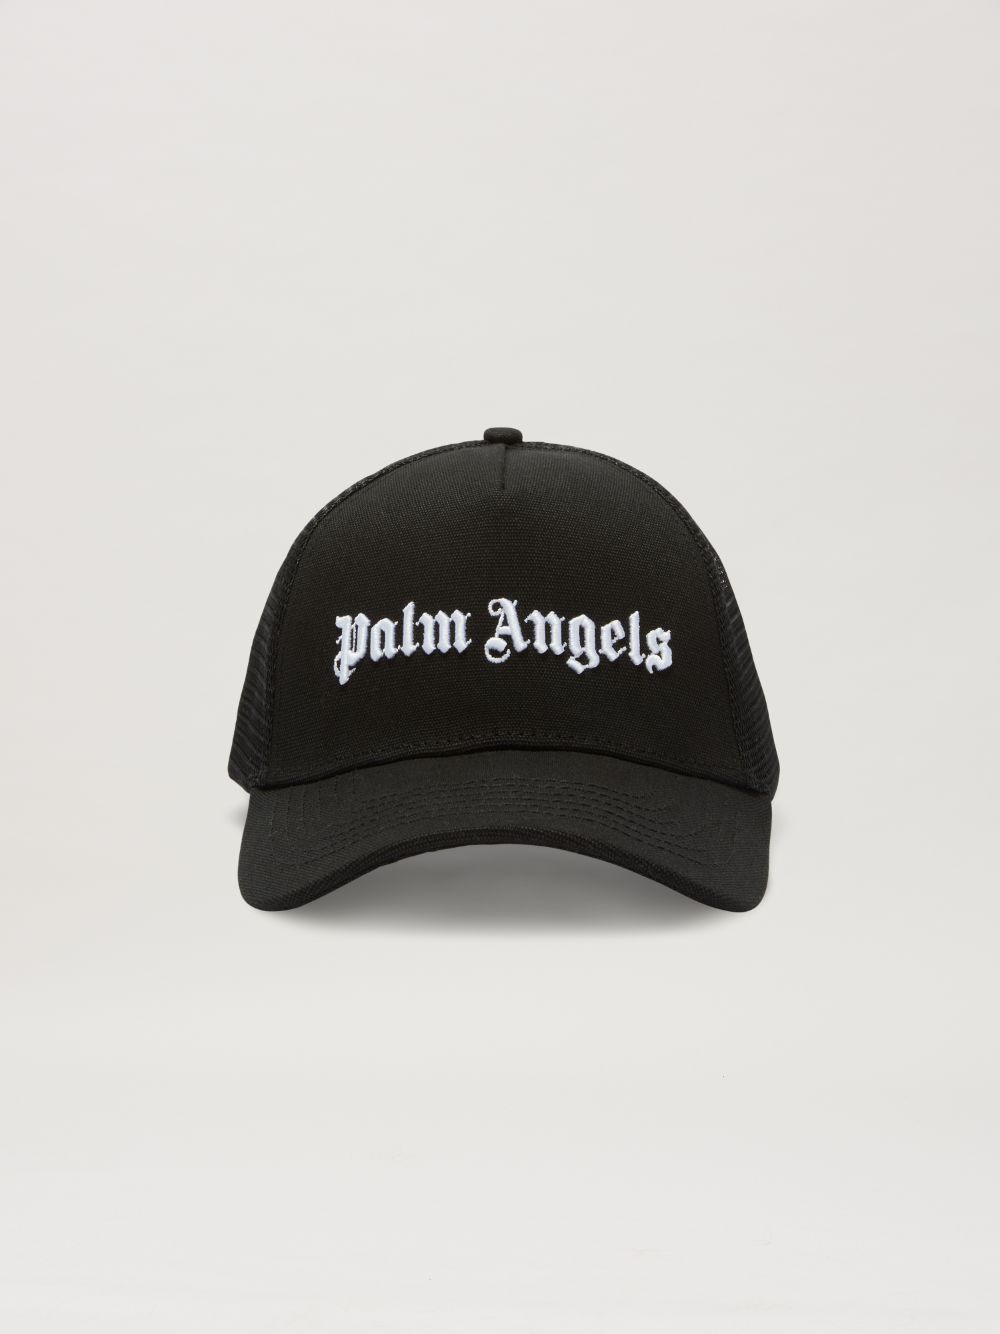 Classic Logo Trucker Cap in black - Palm Angels® Official